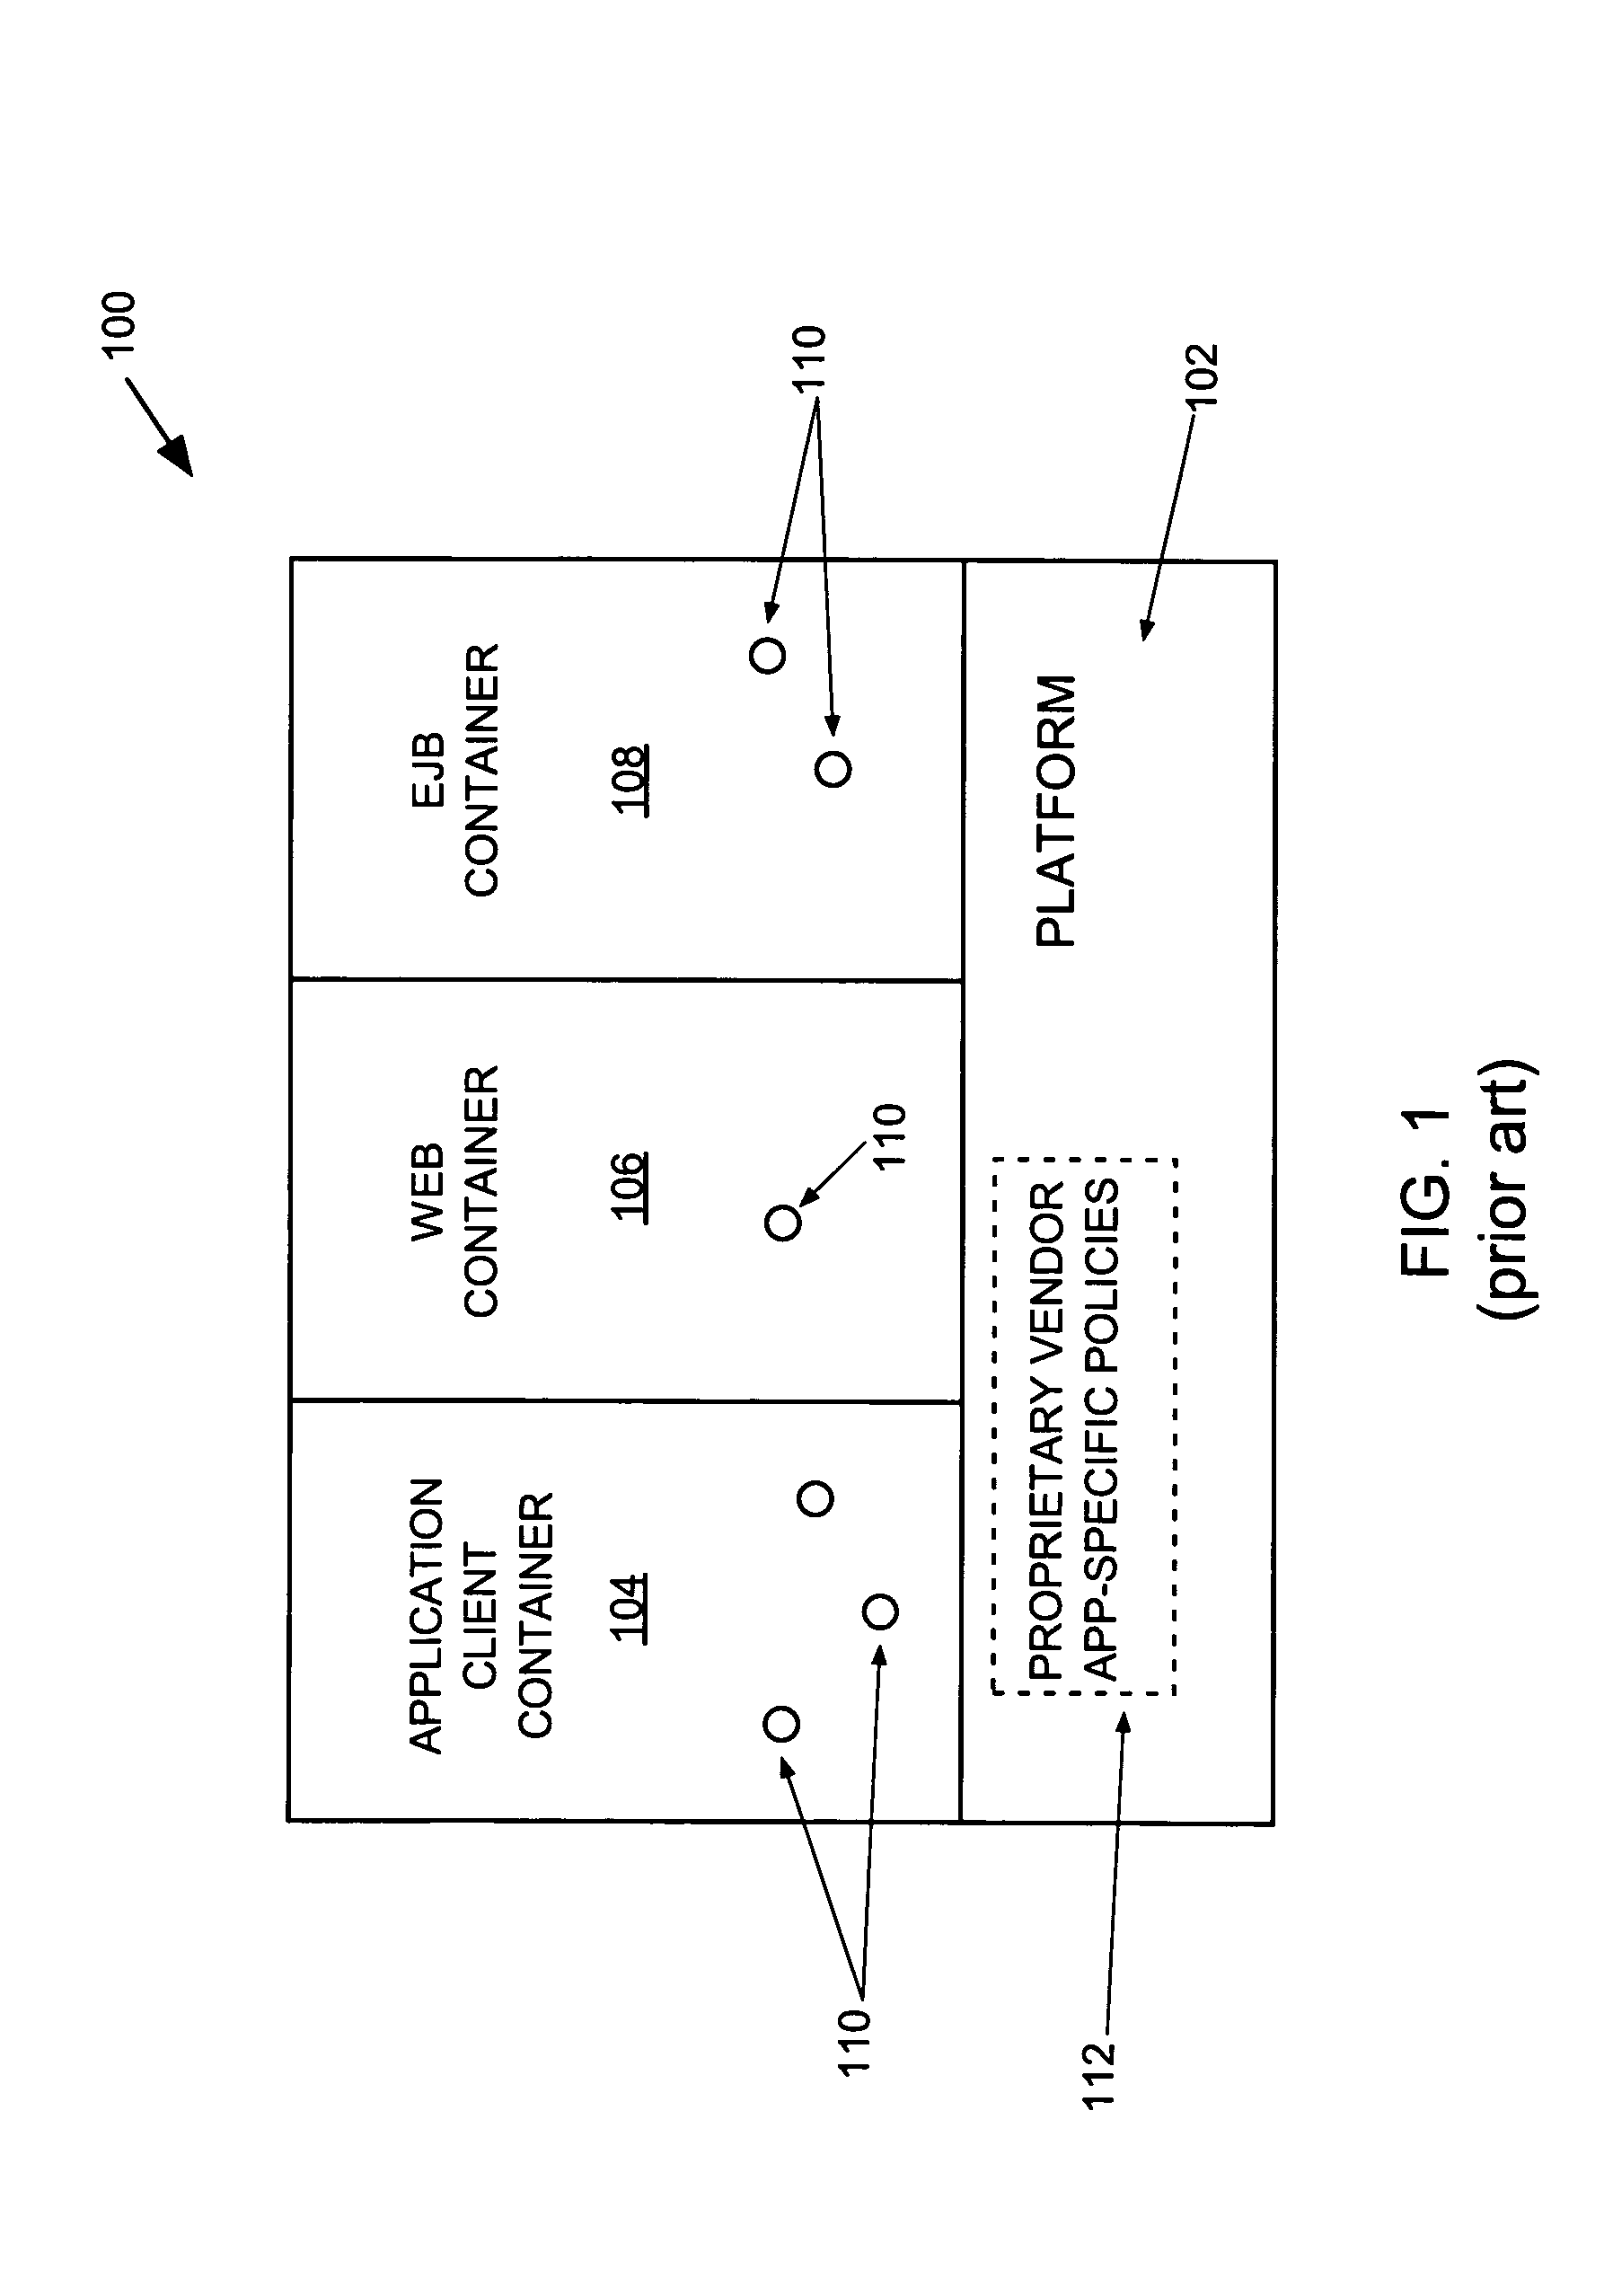 Method and apparatus for providing application specific strategies to a JAVA platform including start and stop policies